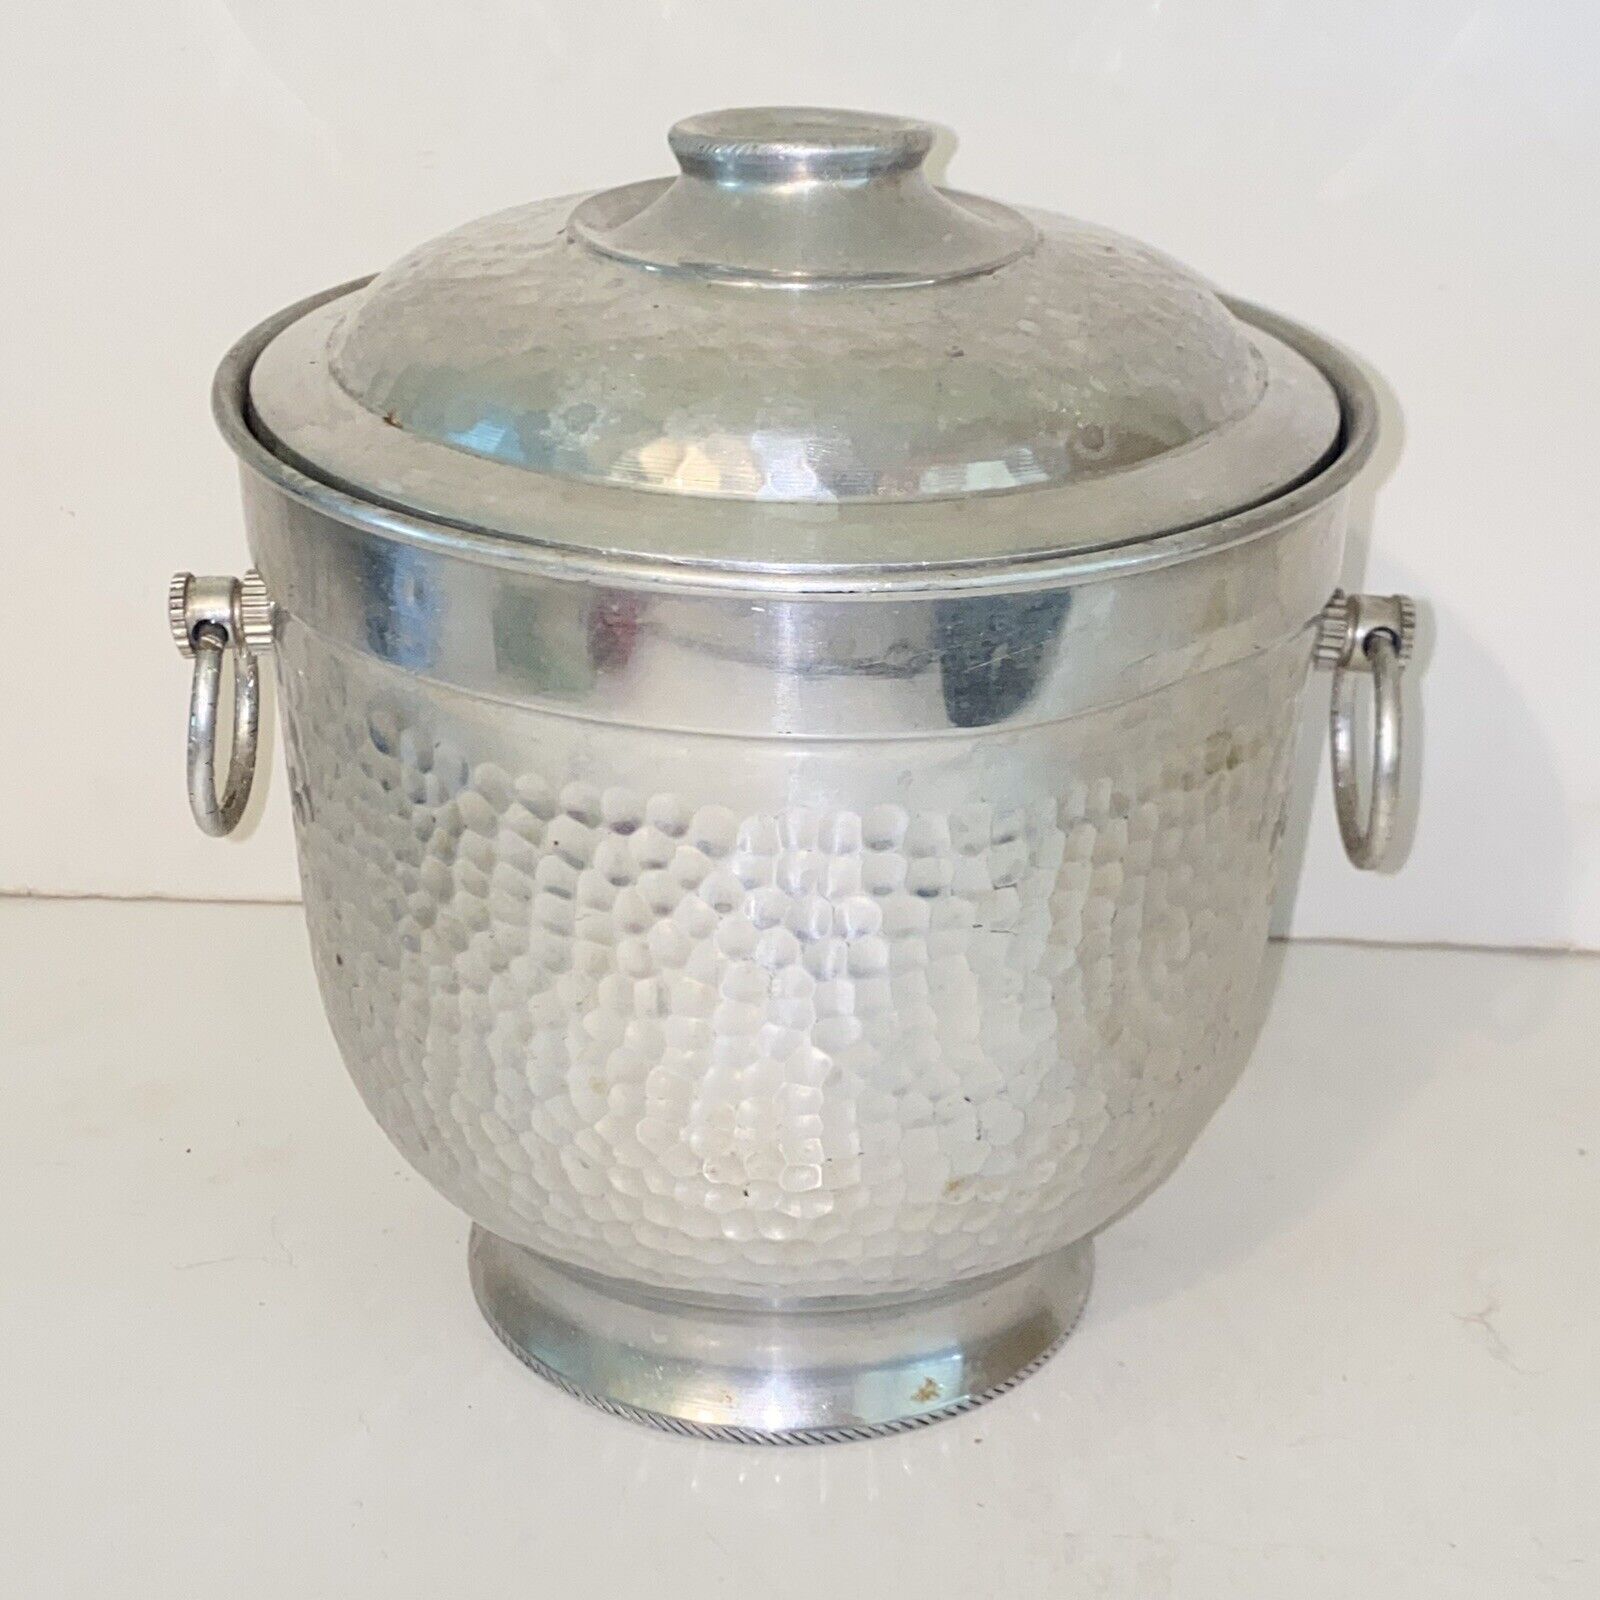 Vintage Hammered Aluminum Ice Bucket Made in Italy by Ray Model BT150